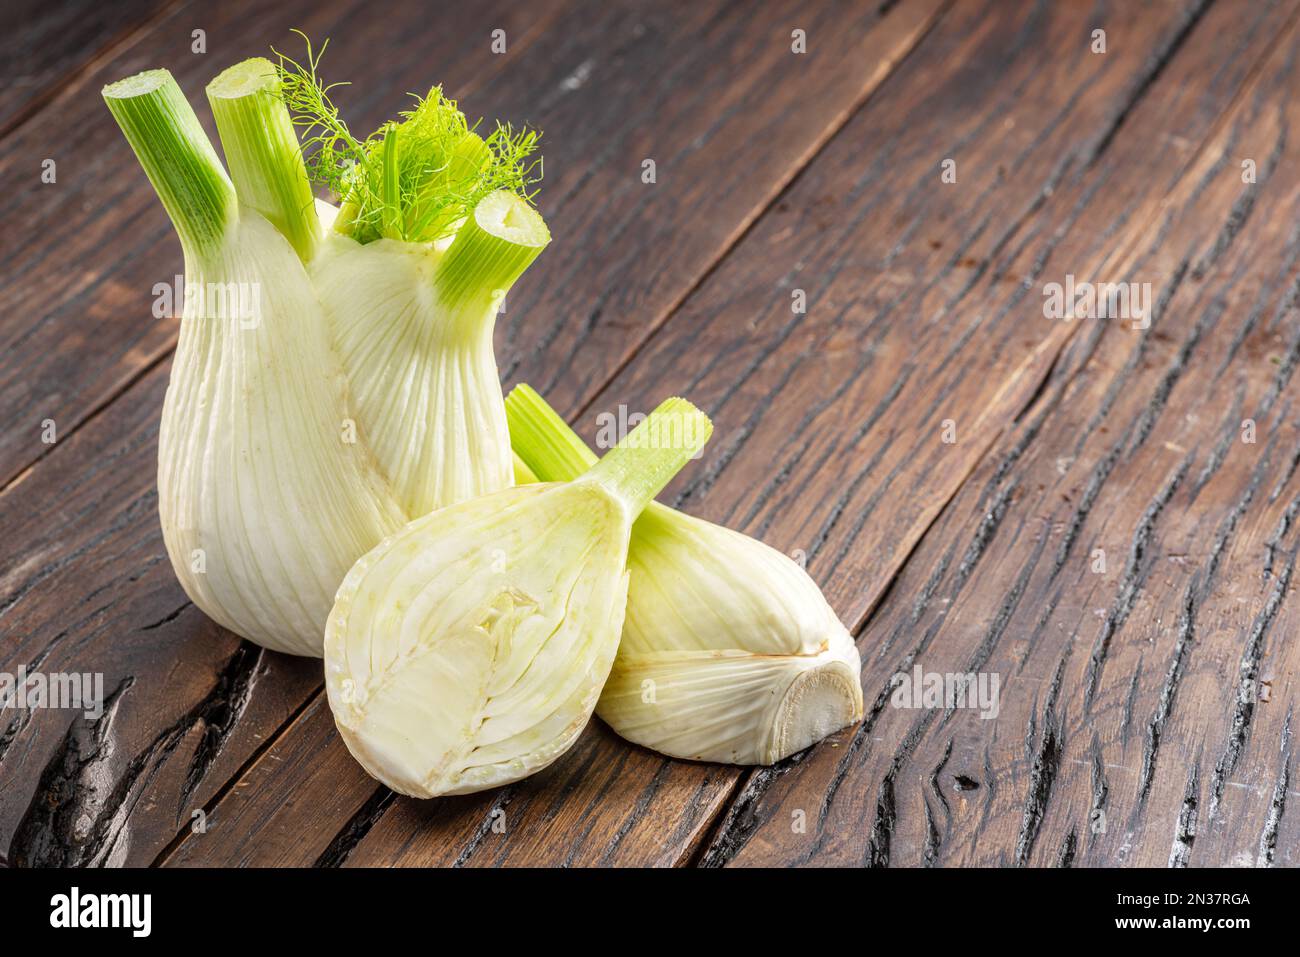 Florence fennel bulbs on aged wood background. Stock Photo